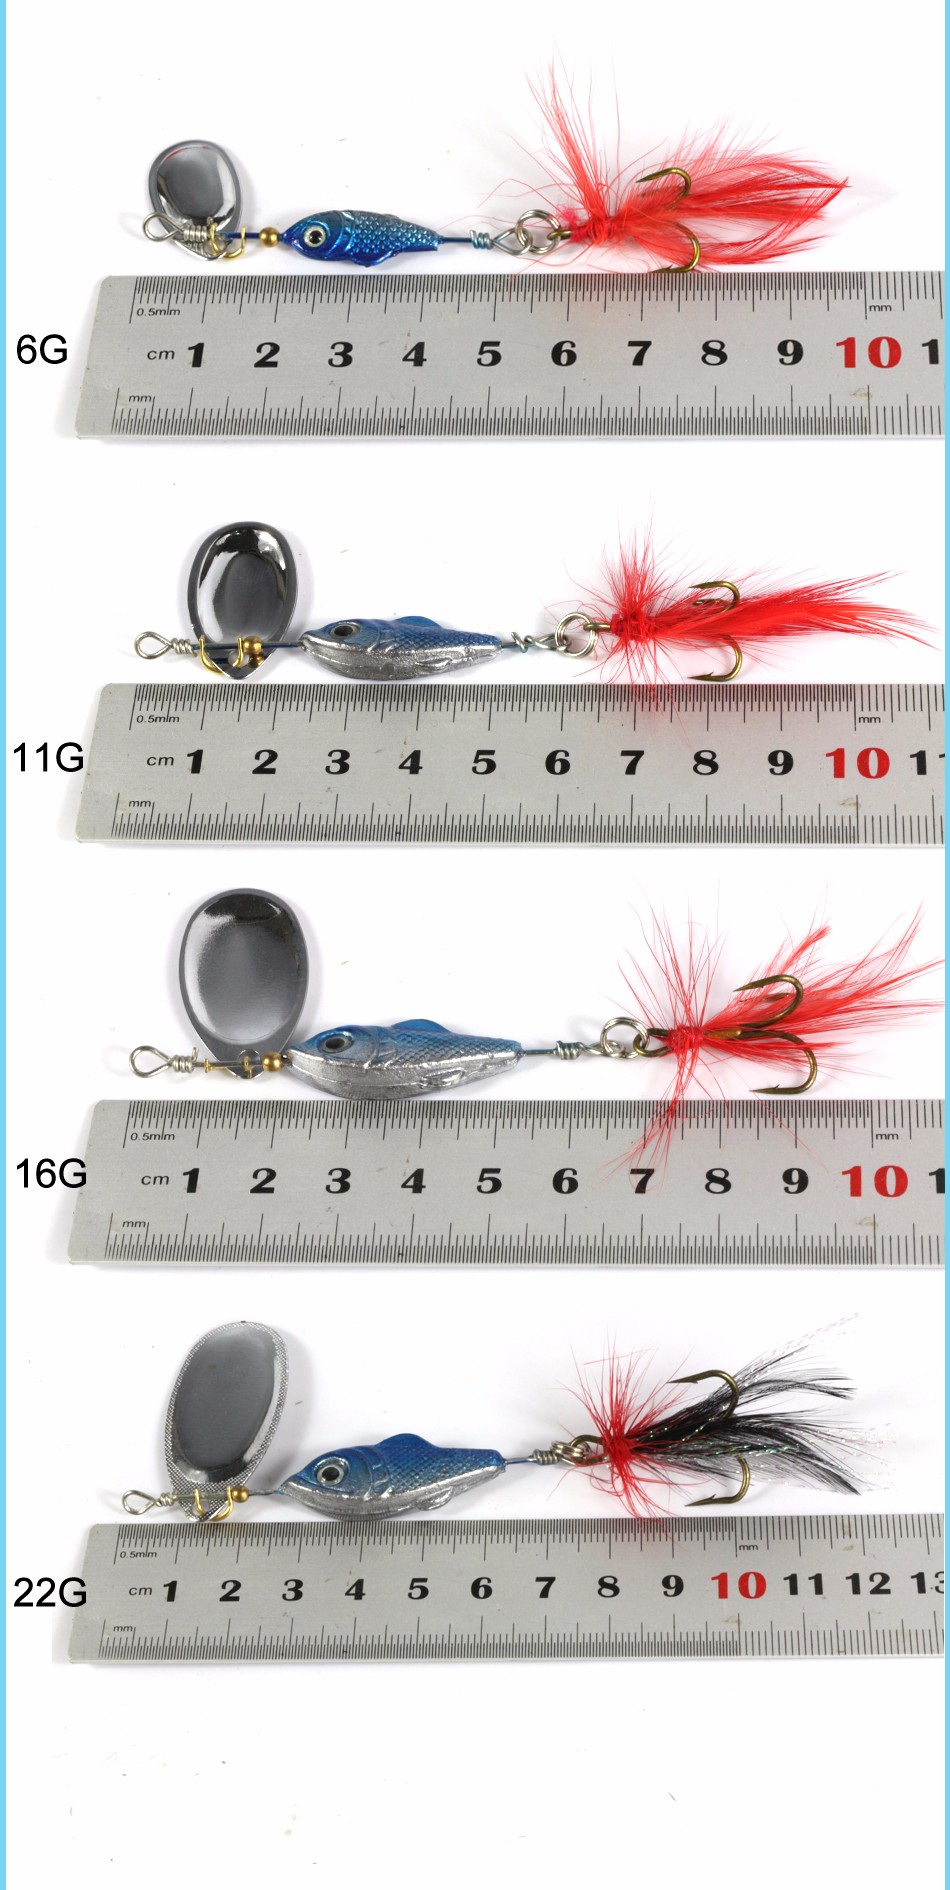 DAGEZI-Blue-Metal-Sequins-Fishing-Lure-Spoon-Lure-with-Feather-Noise-Paillette-Hard-Baits-with-Trebl-32713611315